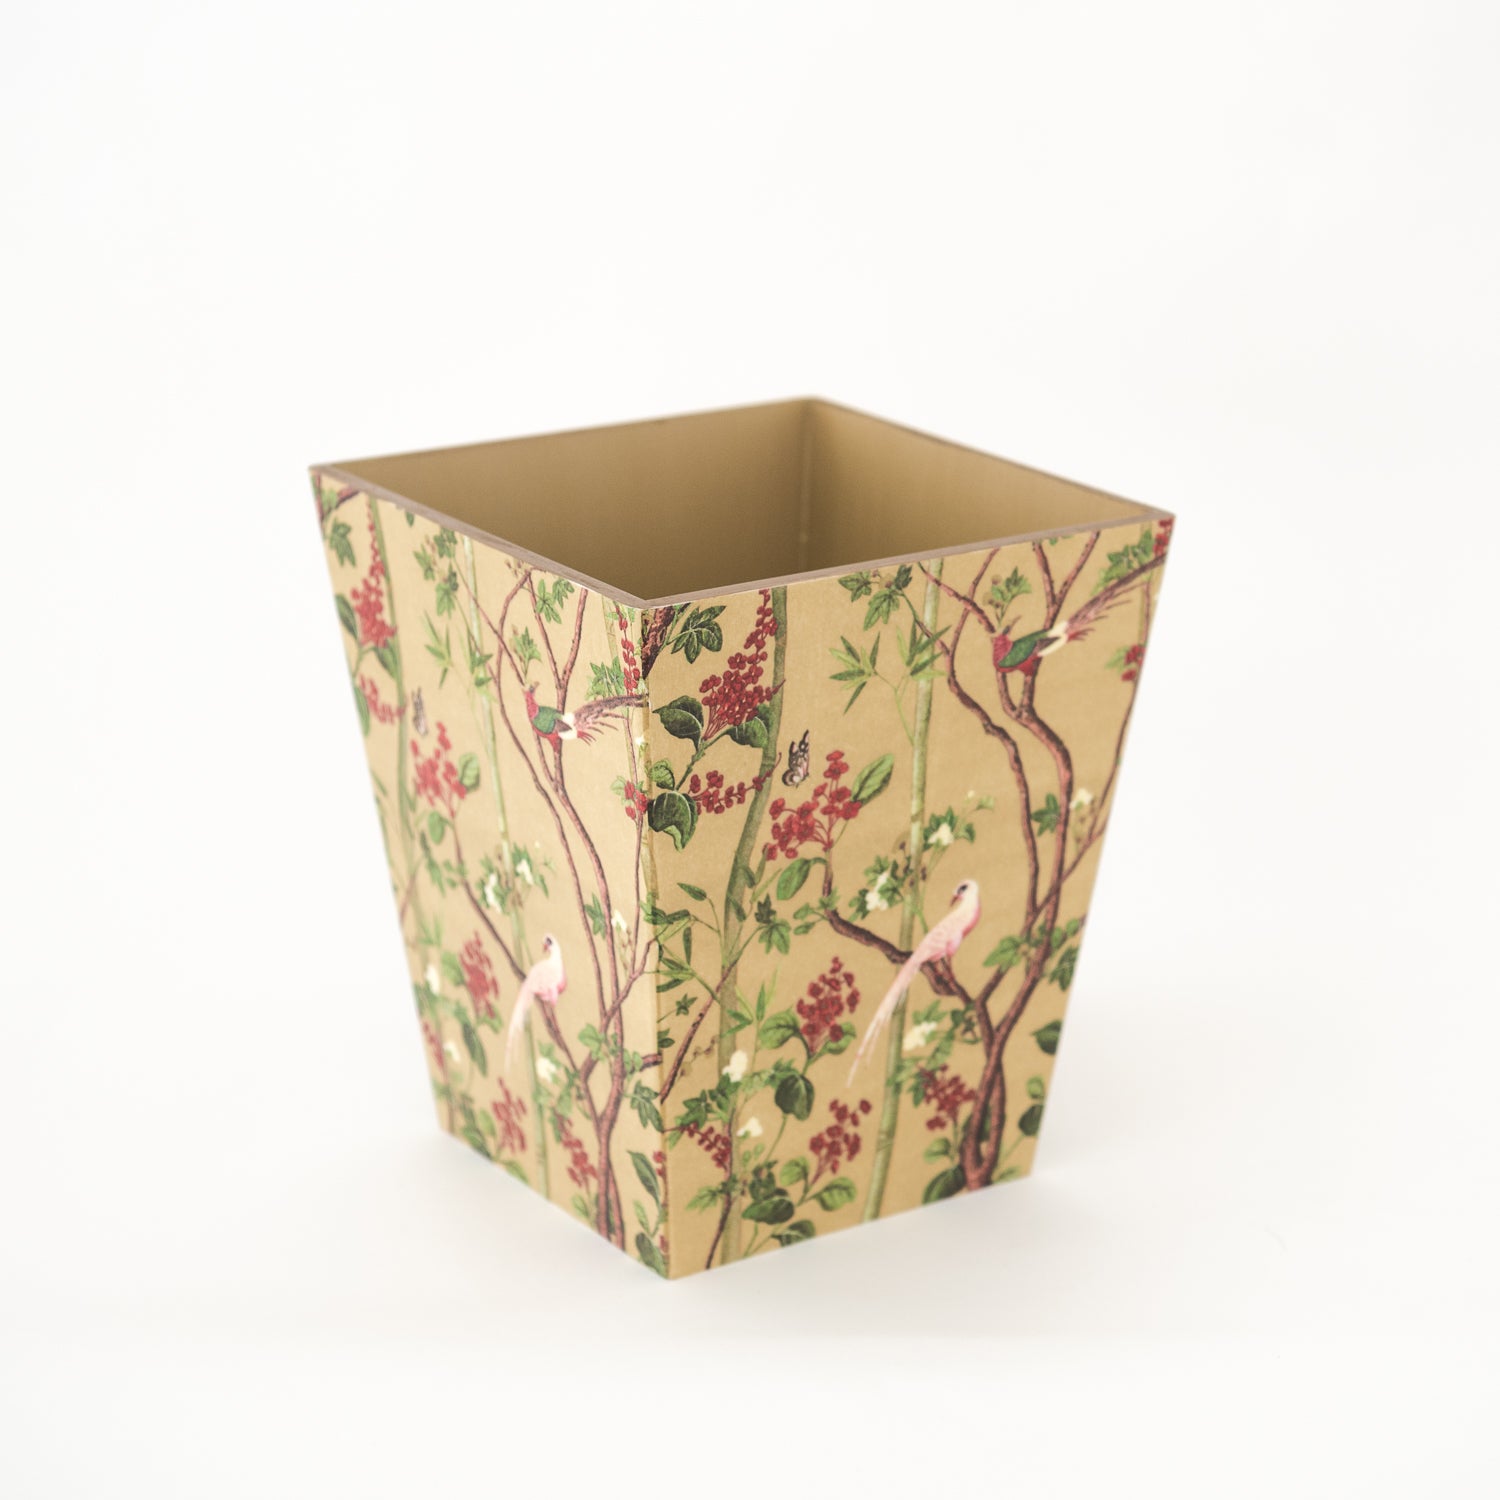 Tissue box Cover wooden Chatsworth Gold